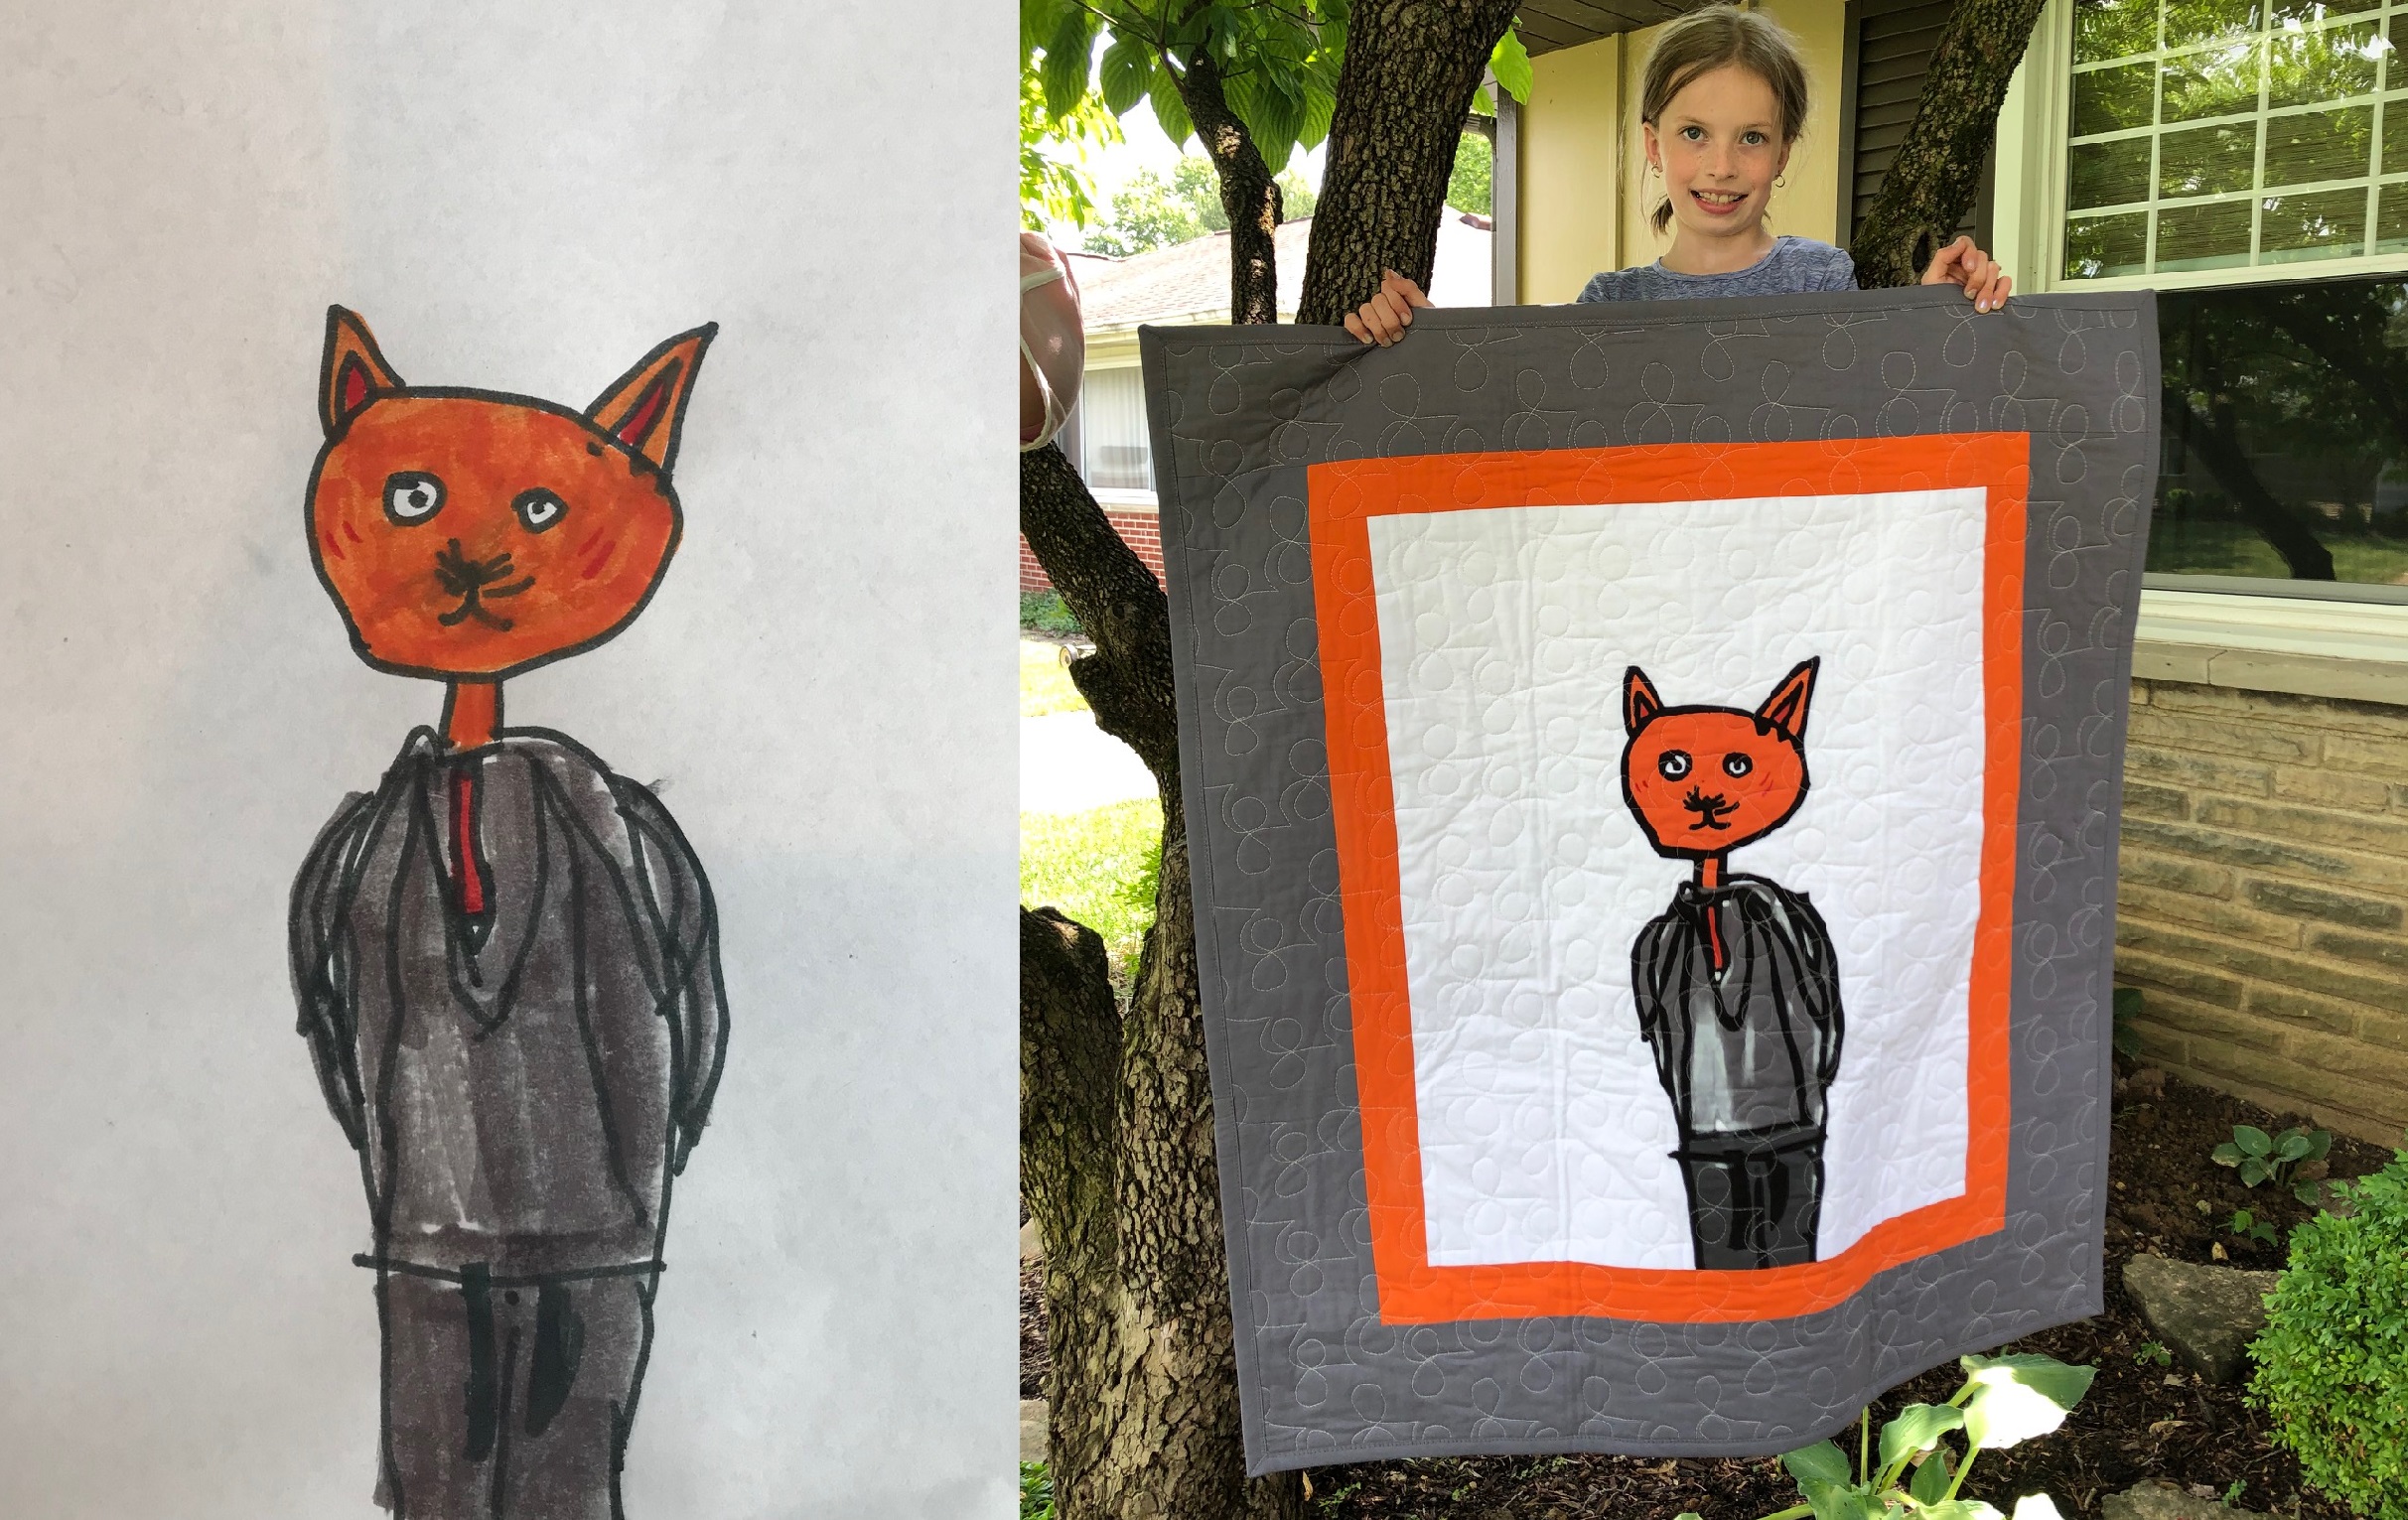 a drawing of a cat standing, wearing a suit and tie next to a photo of girl holding a quilt of the drawing.